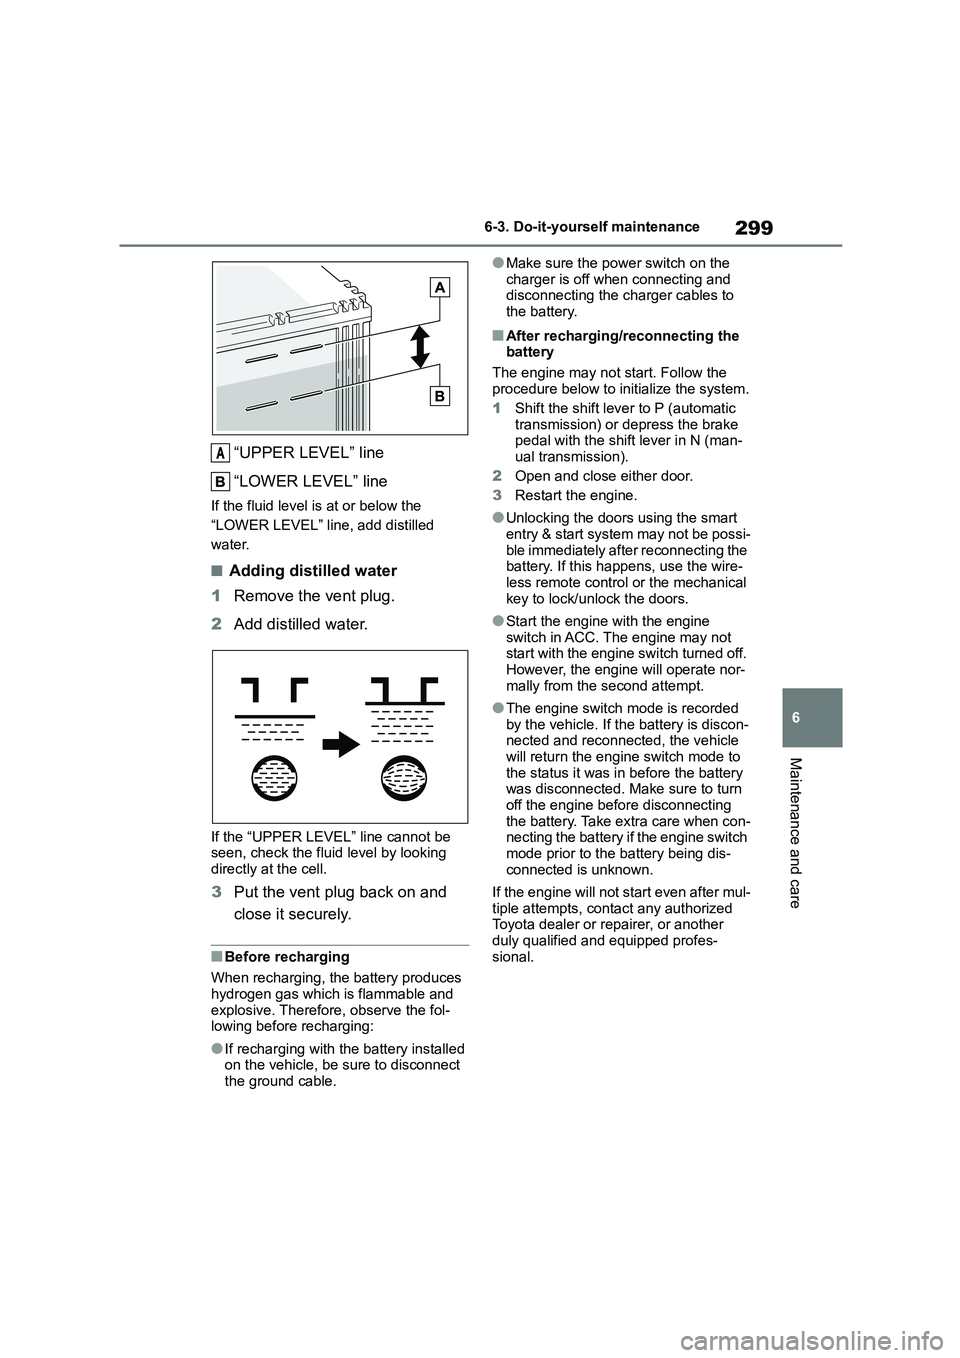 TOYOTA GR86 2022  Owners Manual (in English) 299
6 
6-3. Do-it-yourself maintenance
Maintenance and care
“UPPER LEVEL” line 
“LOWER LEVEL” line
If the fluid level is at or below the  
“LOWER LEVEL” line, add distilled 
water.
■Addi